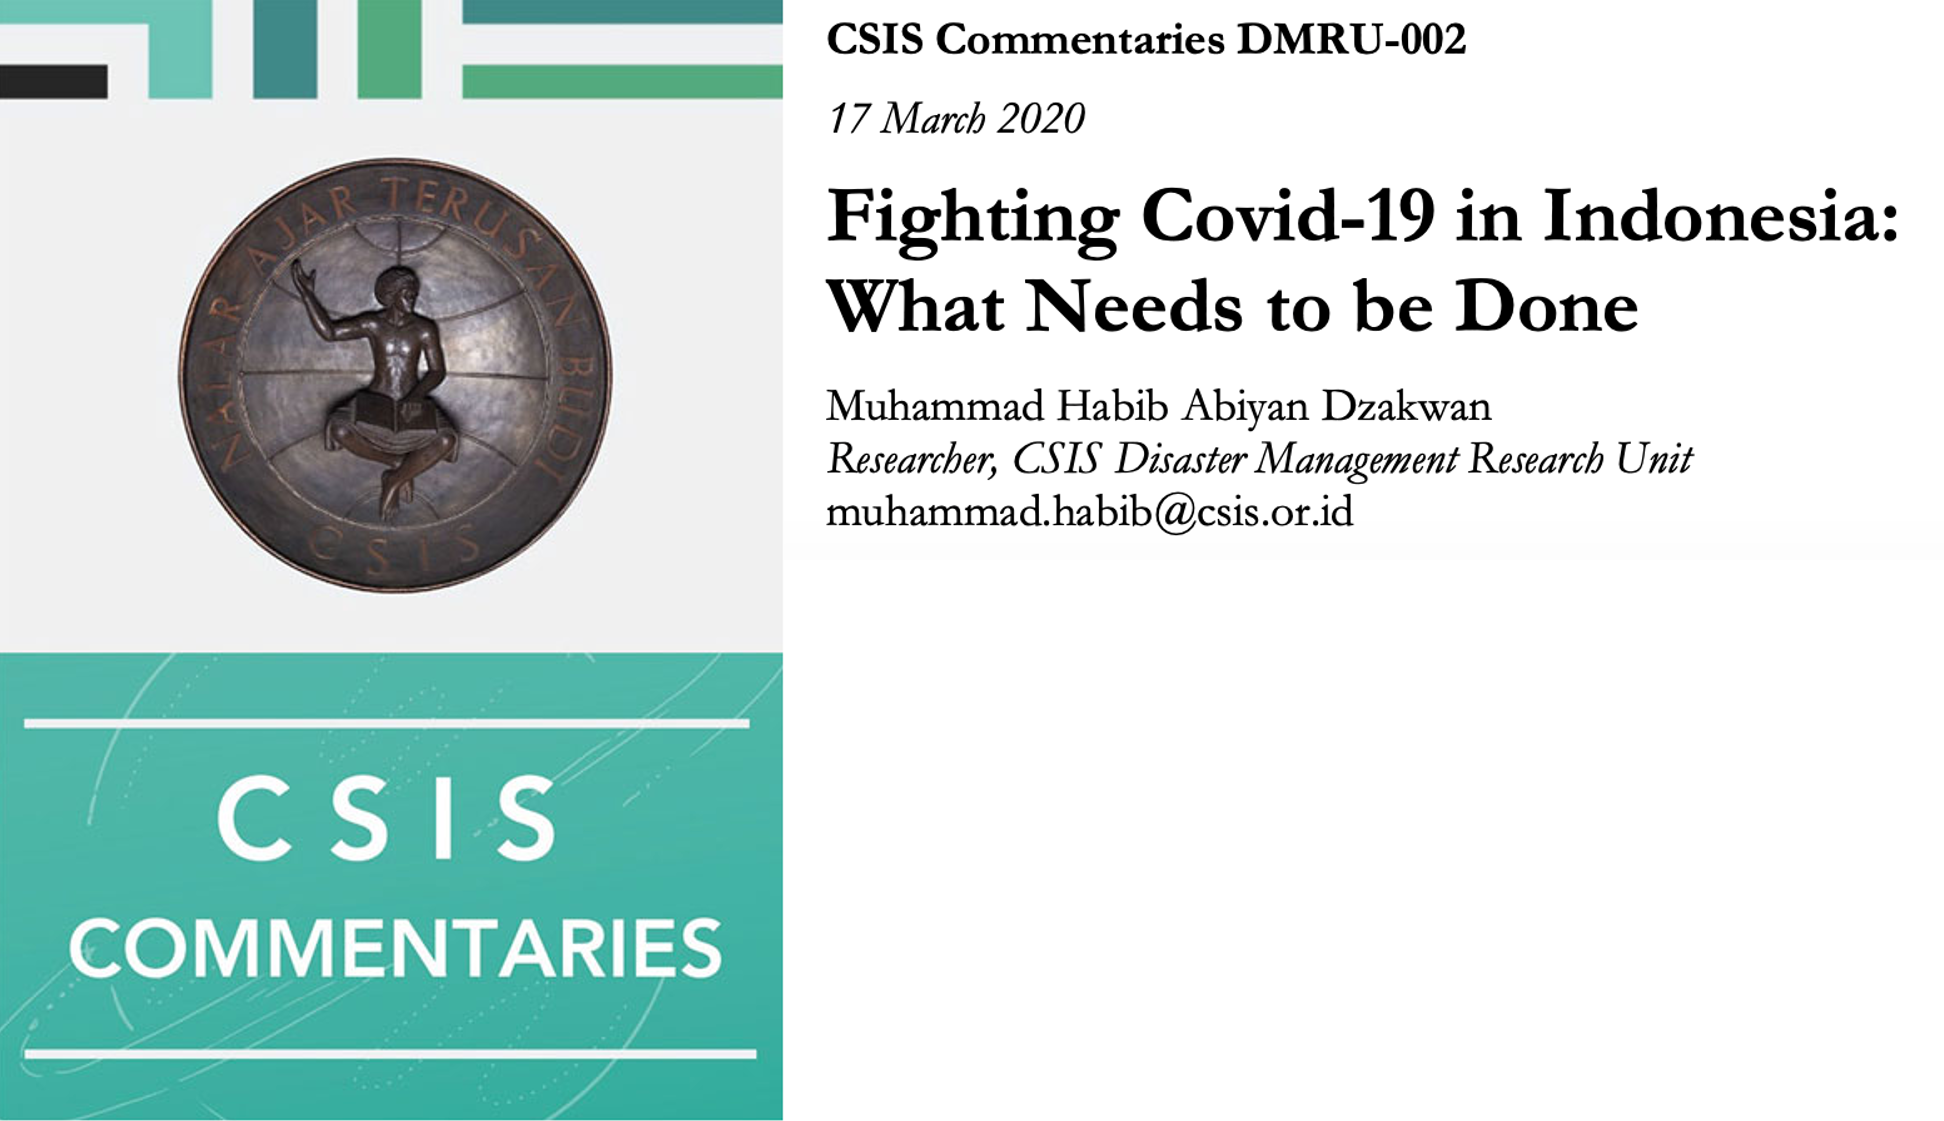 Fighting Covid-19 in Indonesia: What Needs to be Done